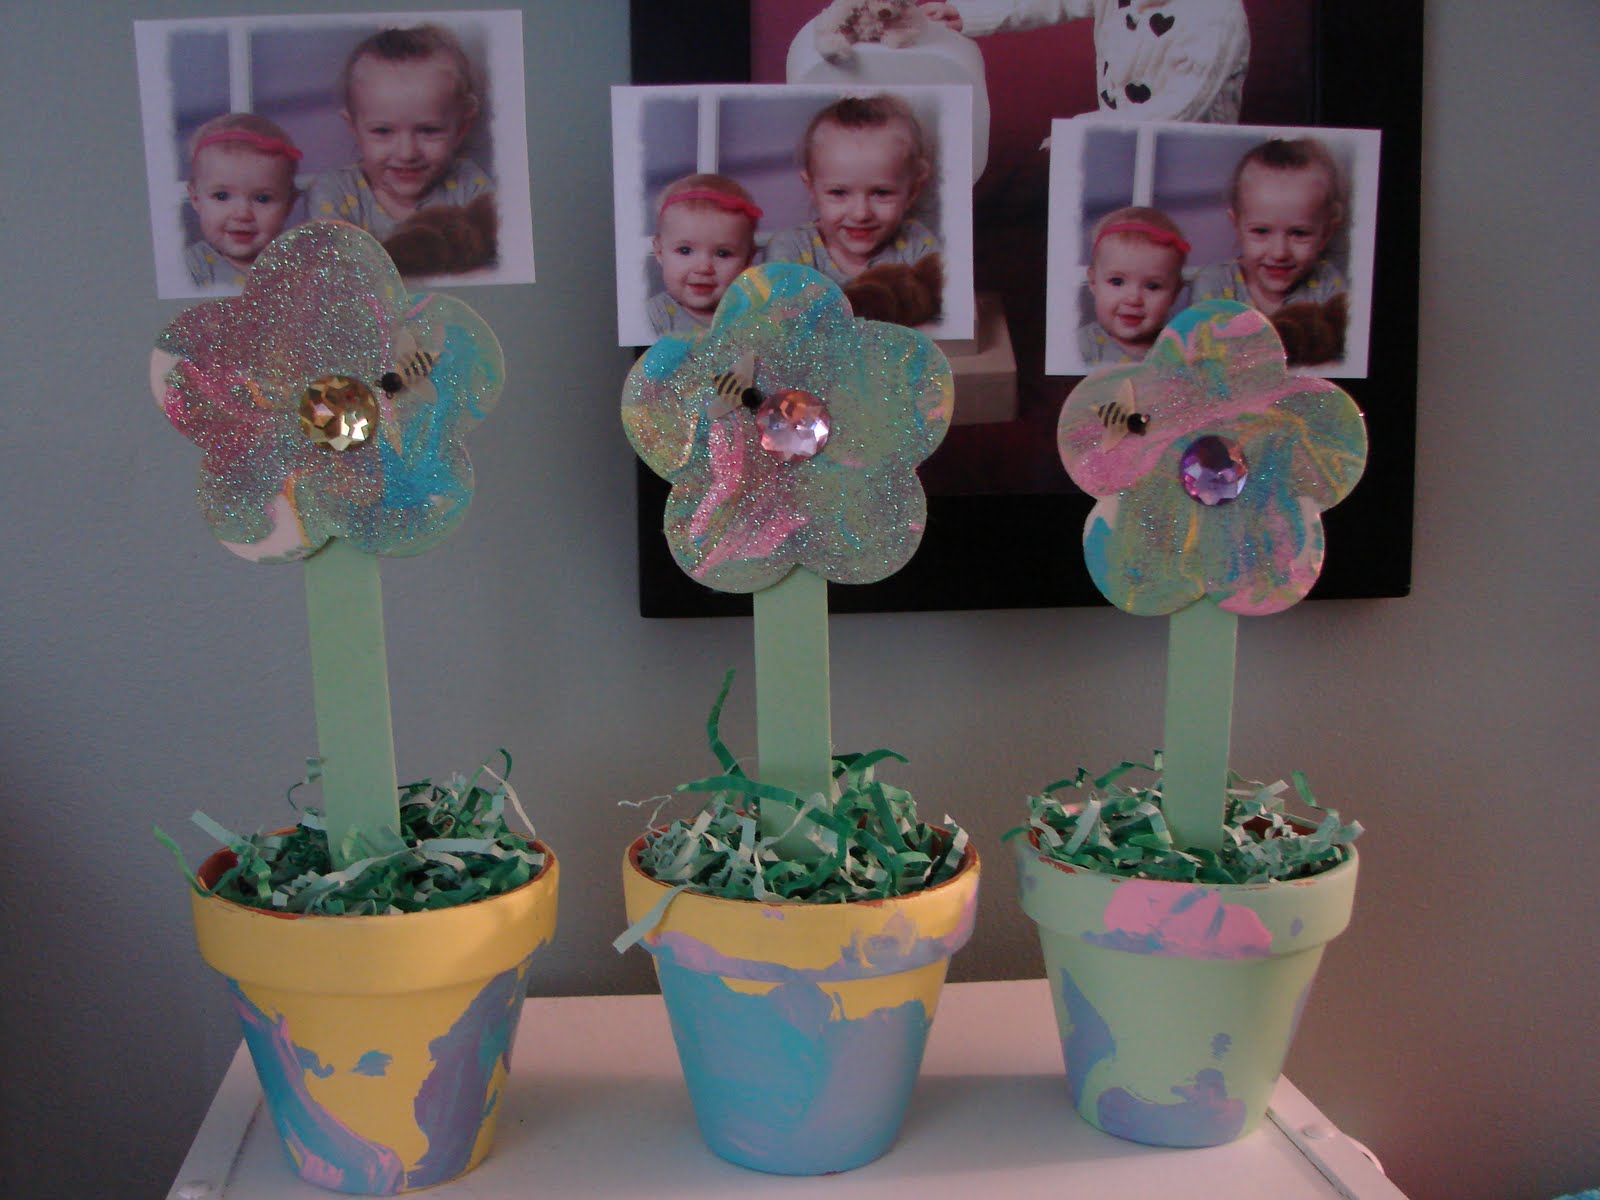 flower pot ideas for mother's day Mother's Day Flower Pot Craft Idea | 1600 x 1200